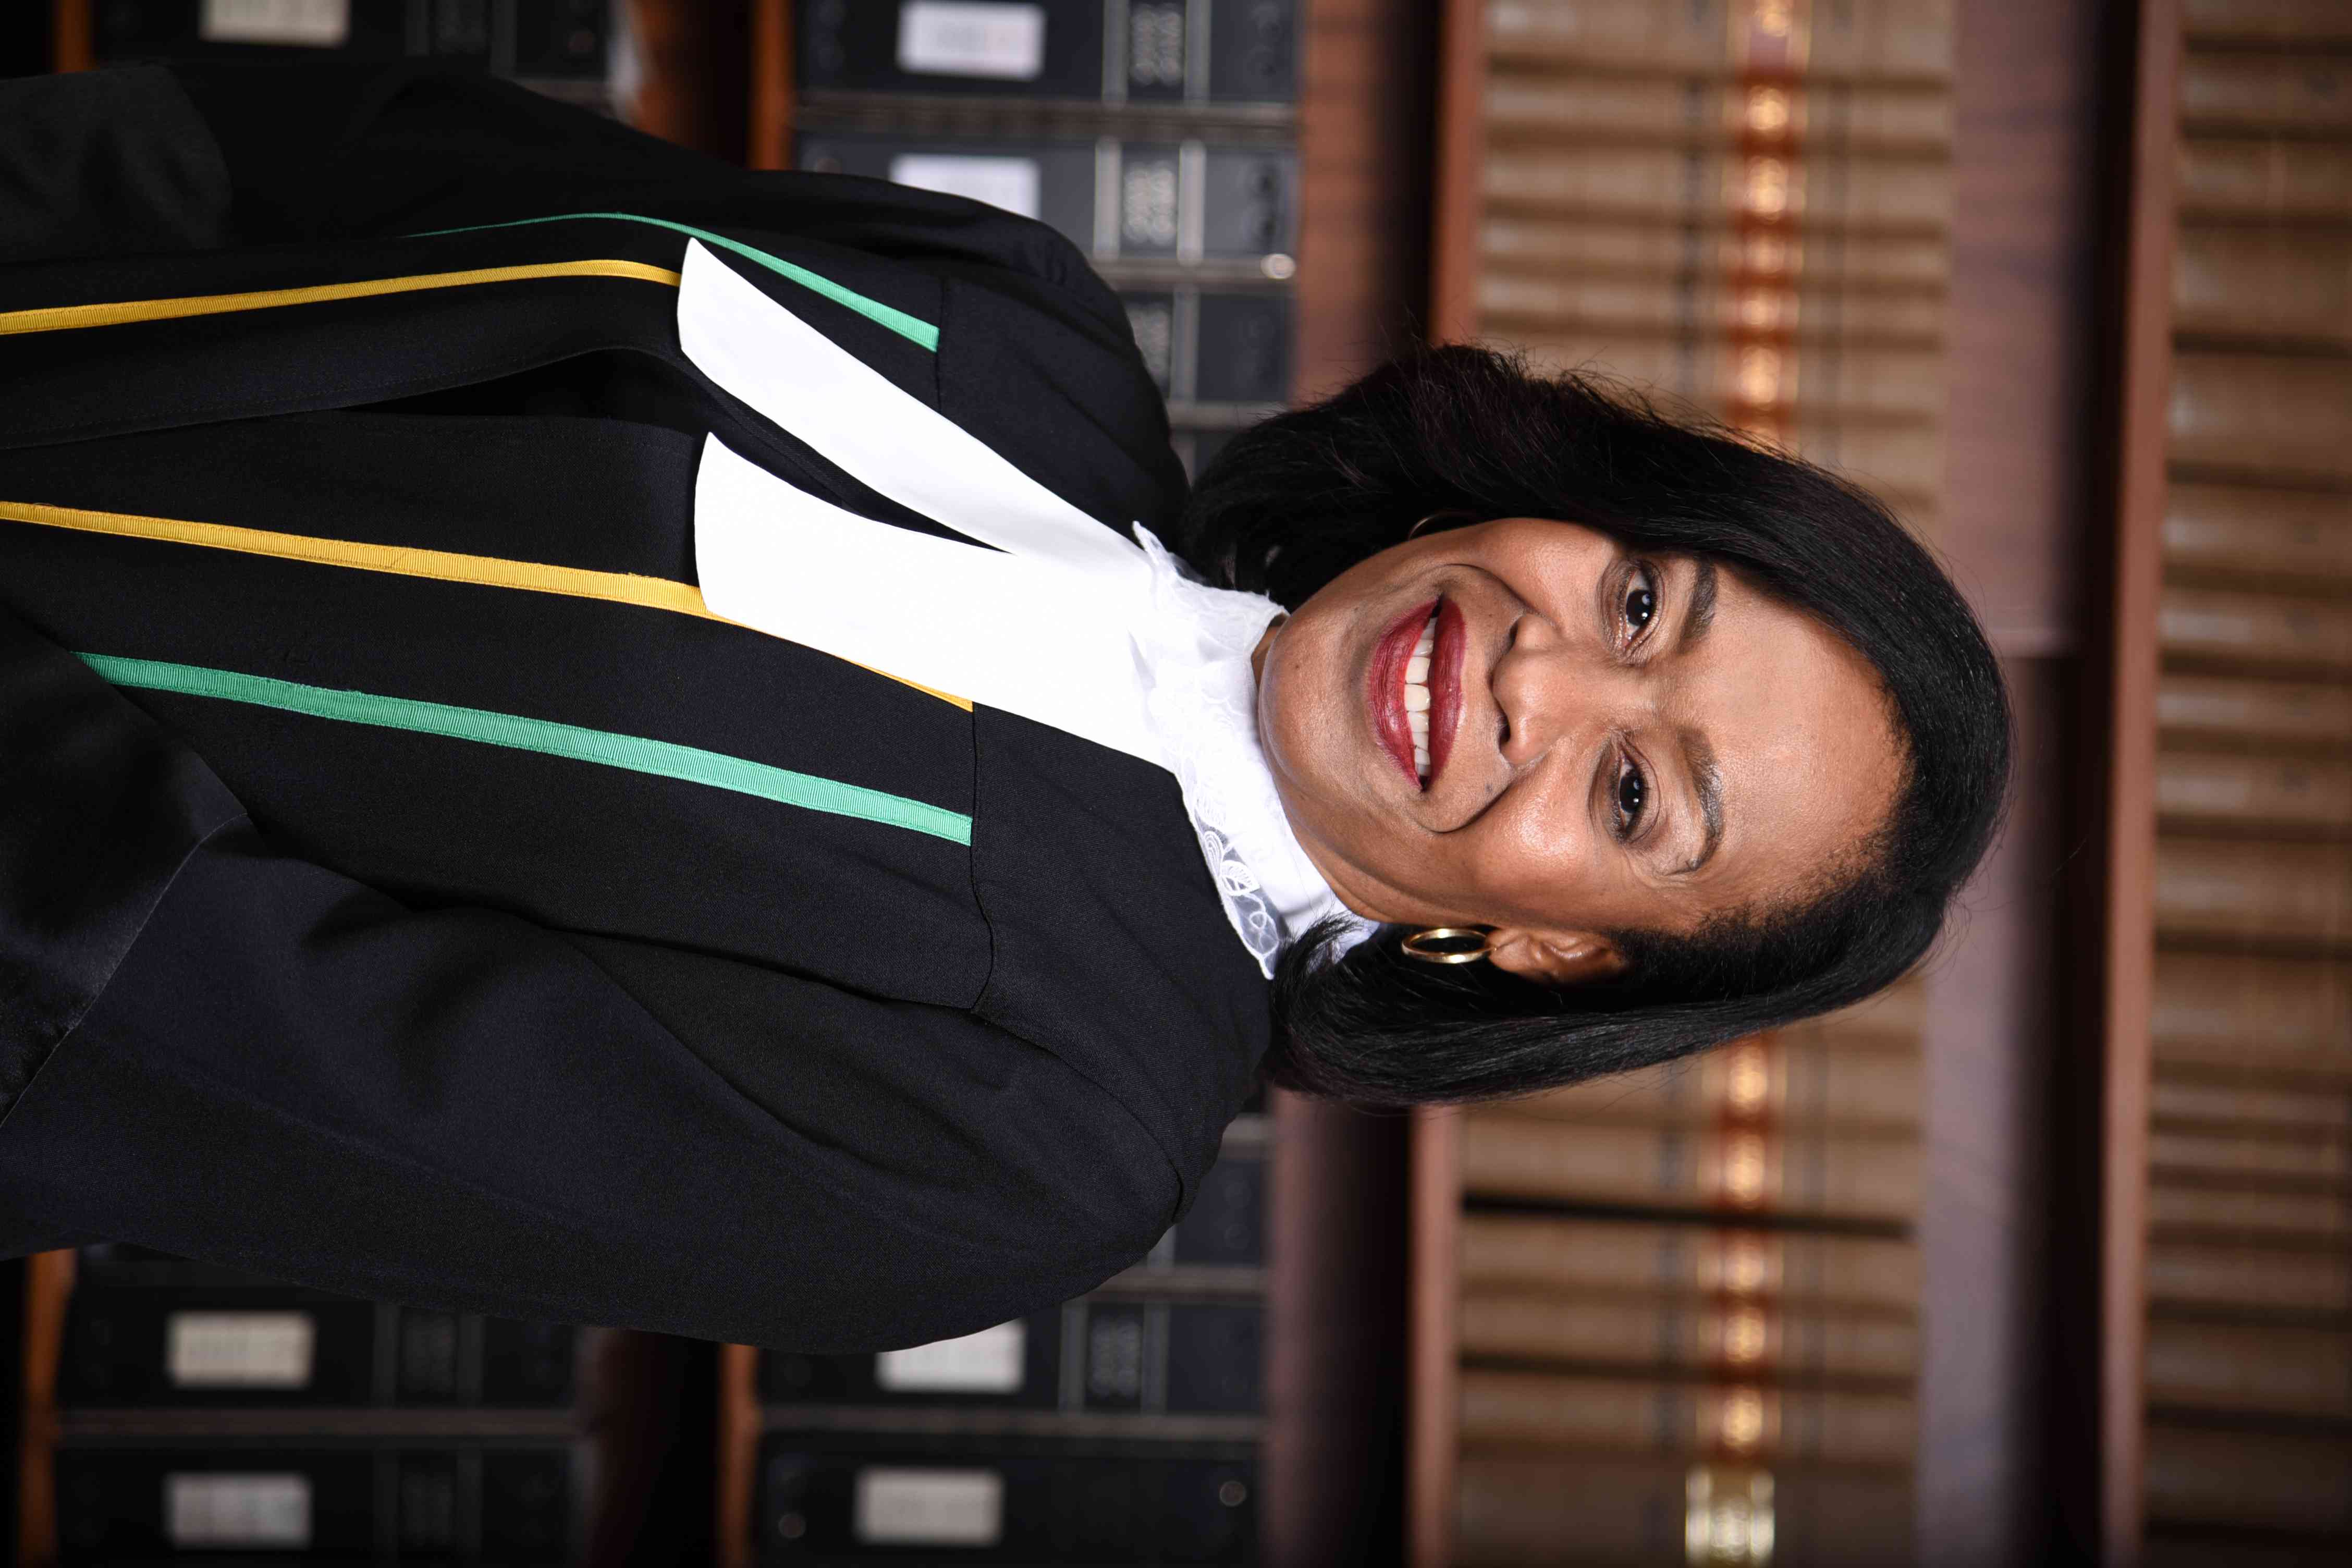 The Honourable Miss Justice Simmons JA